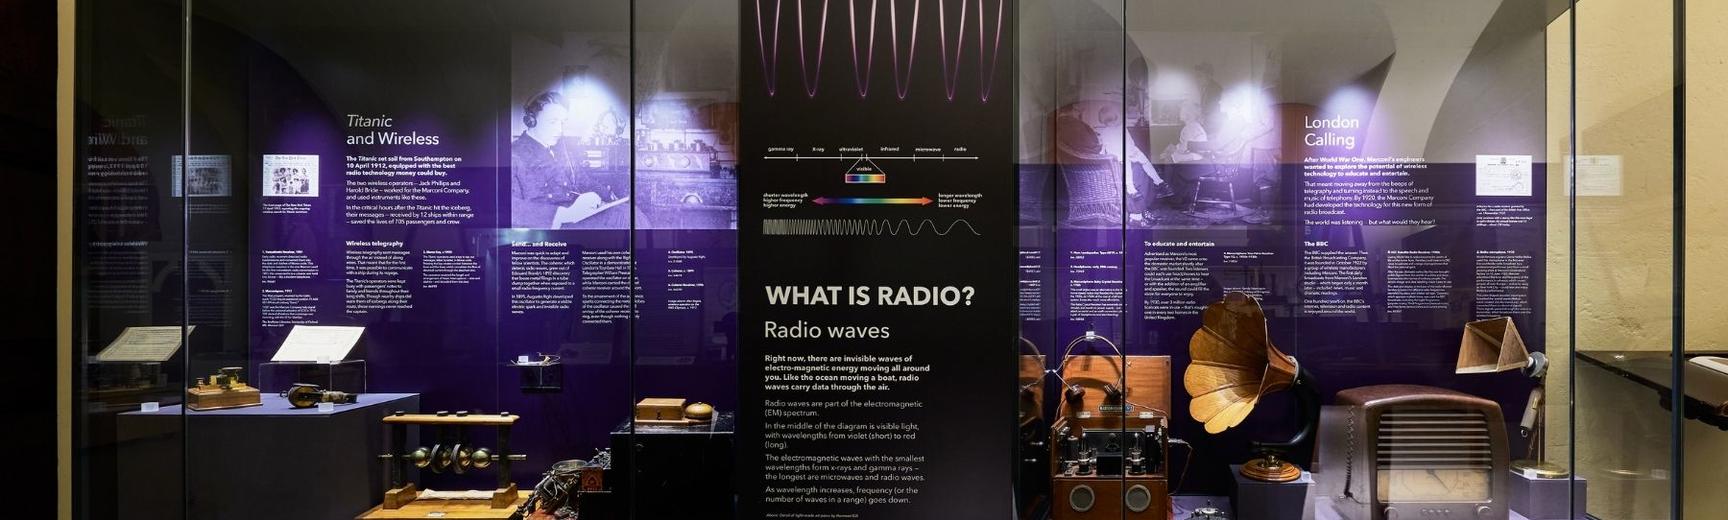 Making Waves display, Basement Gallery, History of Science Museum, Oxford